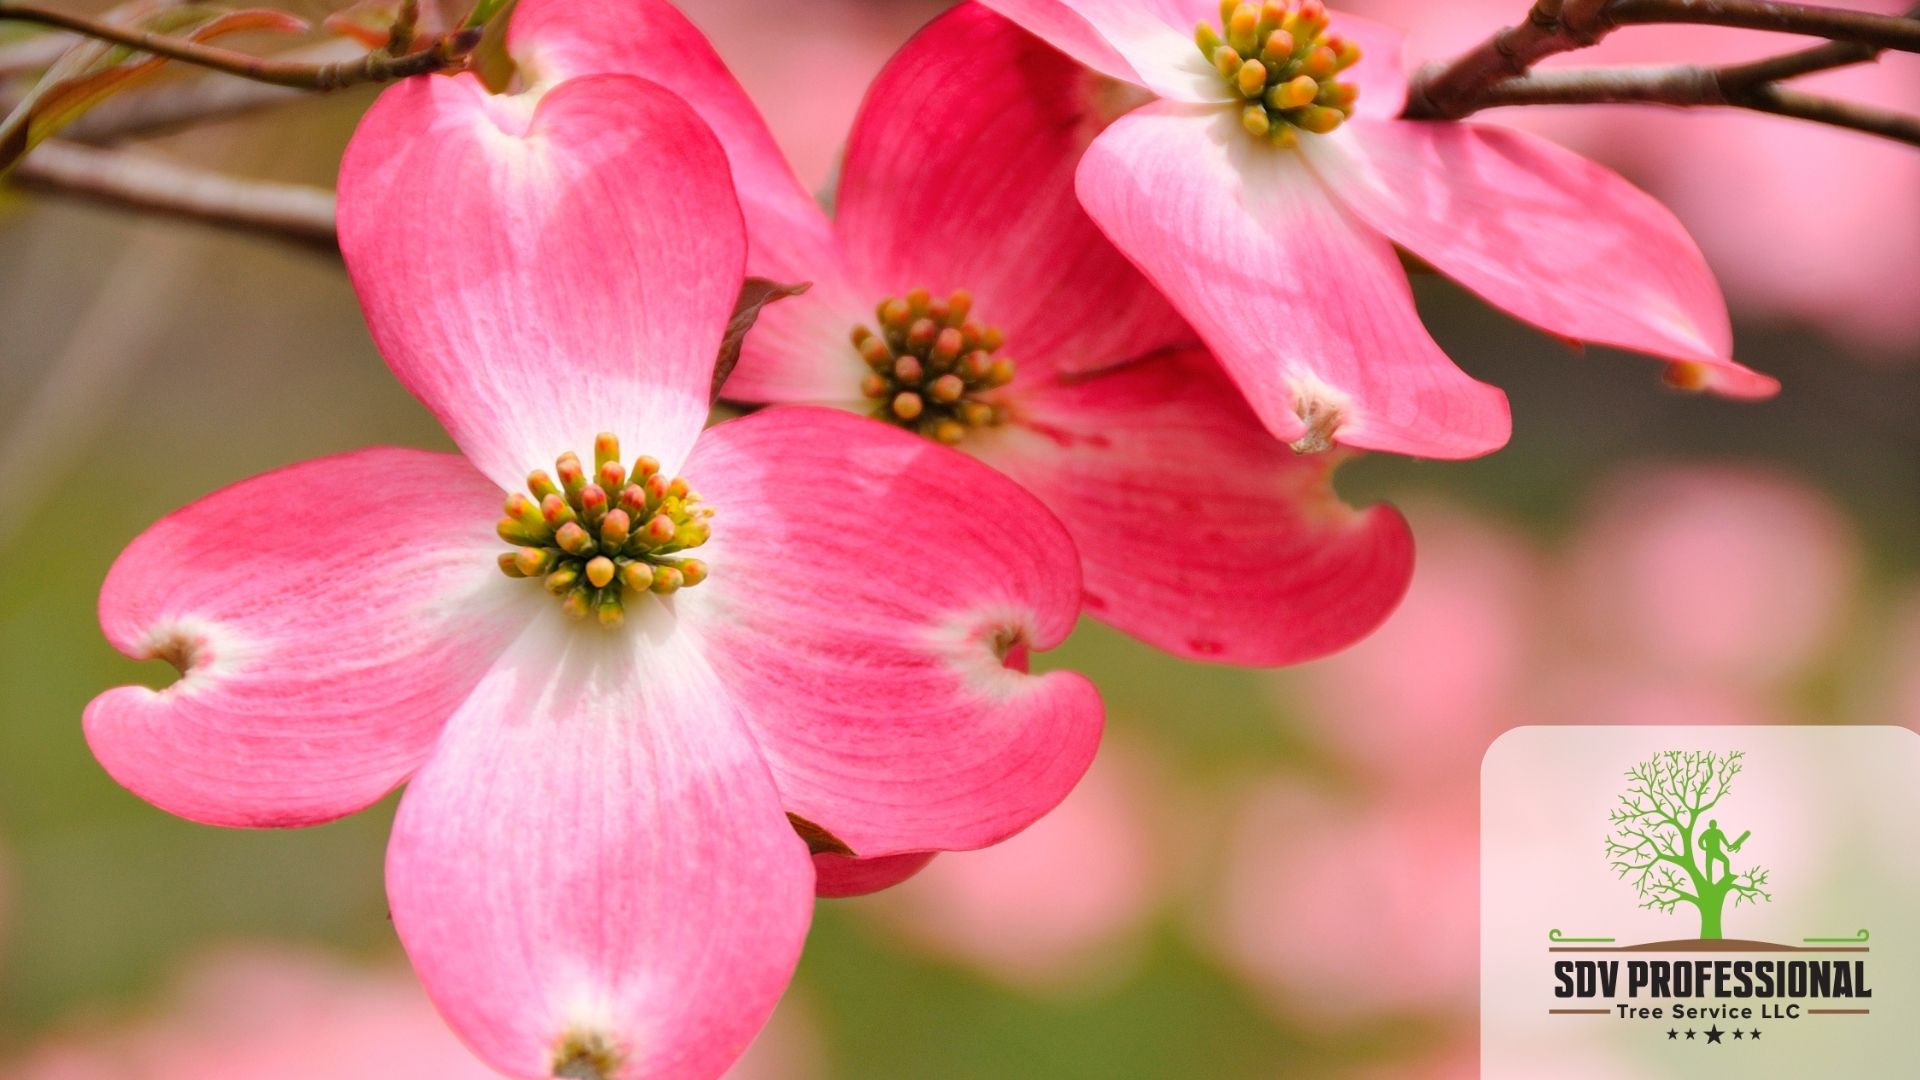 One of the most enchanting features of dogwood trees is their exquisite pink or white flowers.